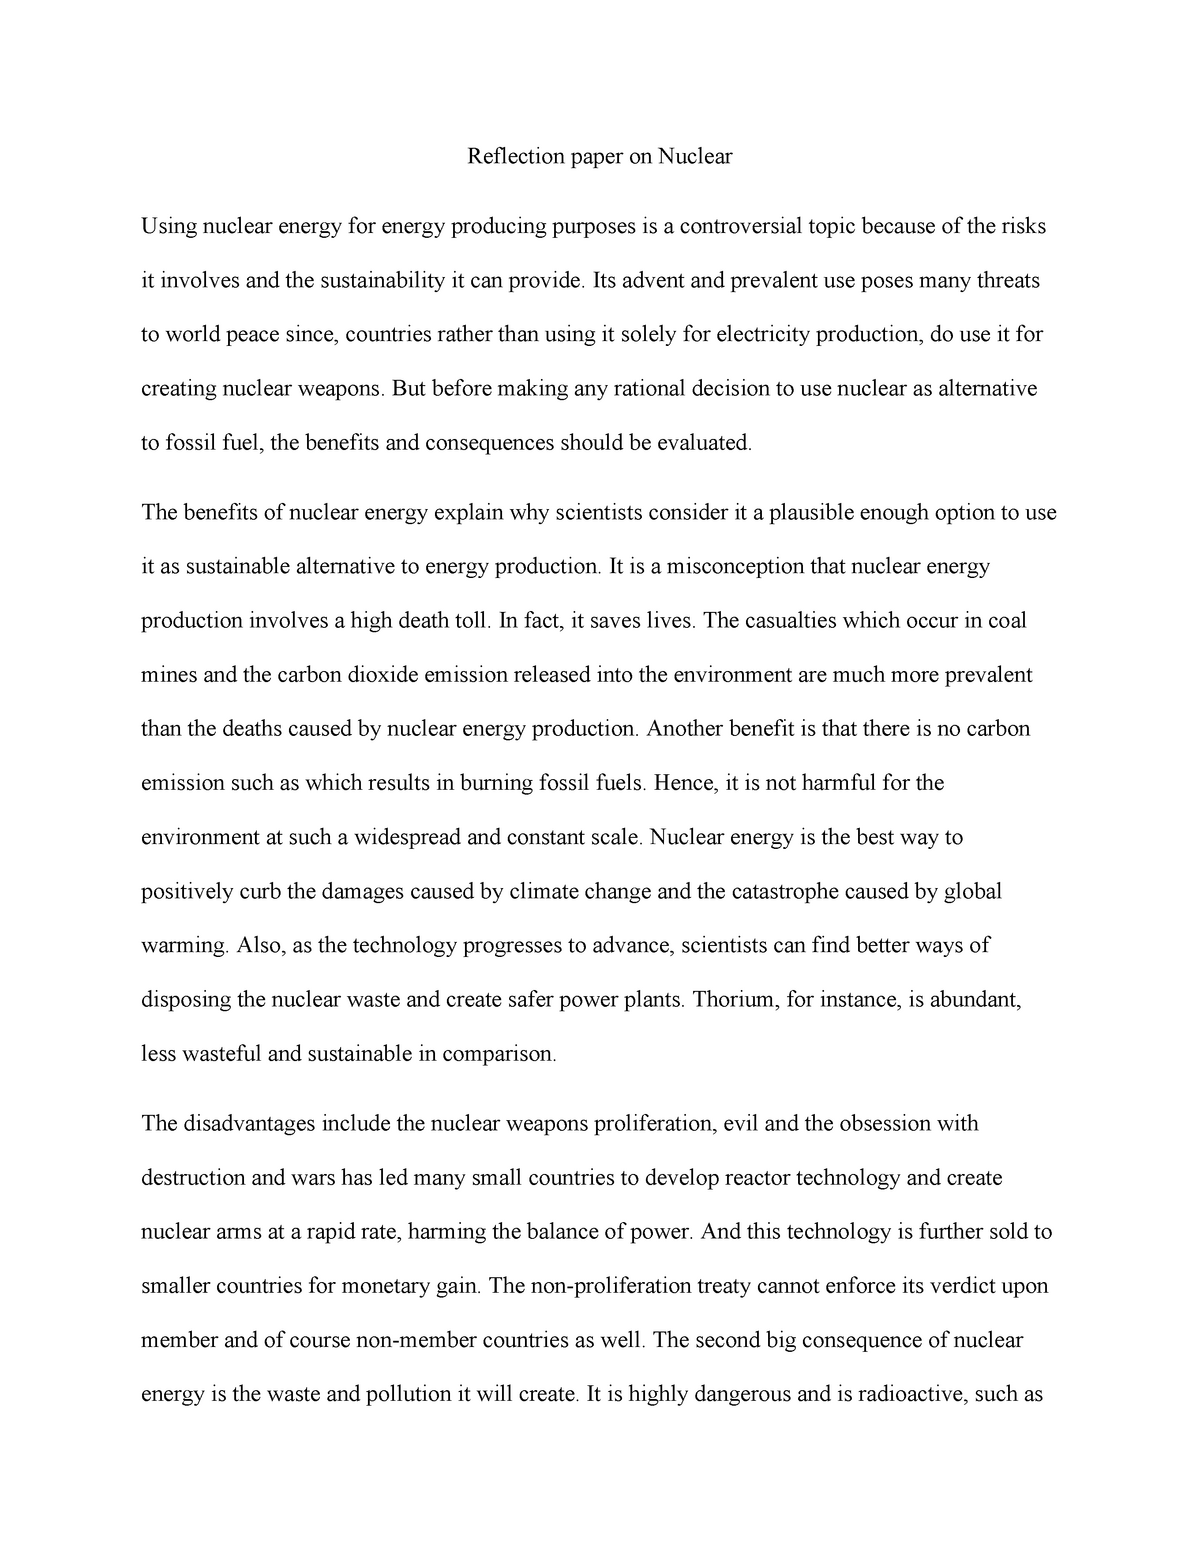 thesis statement about nuclear power